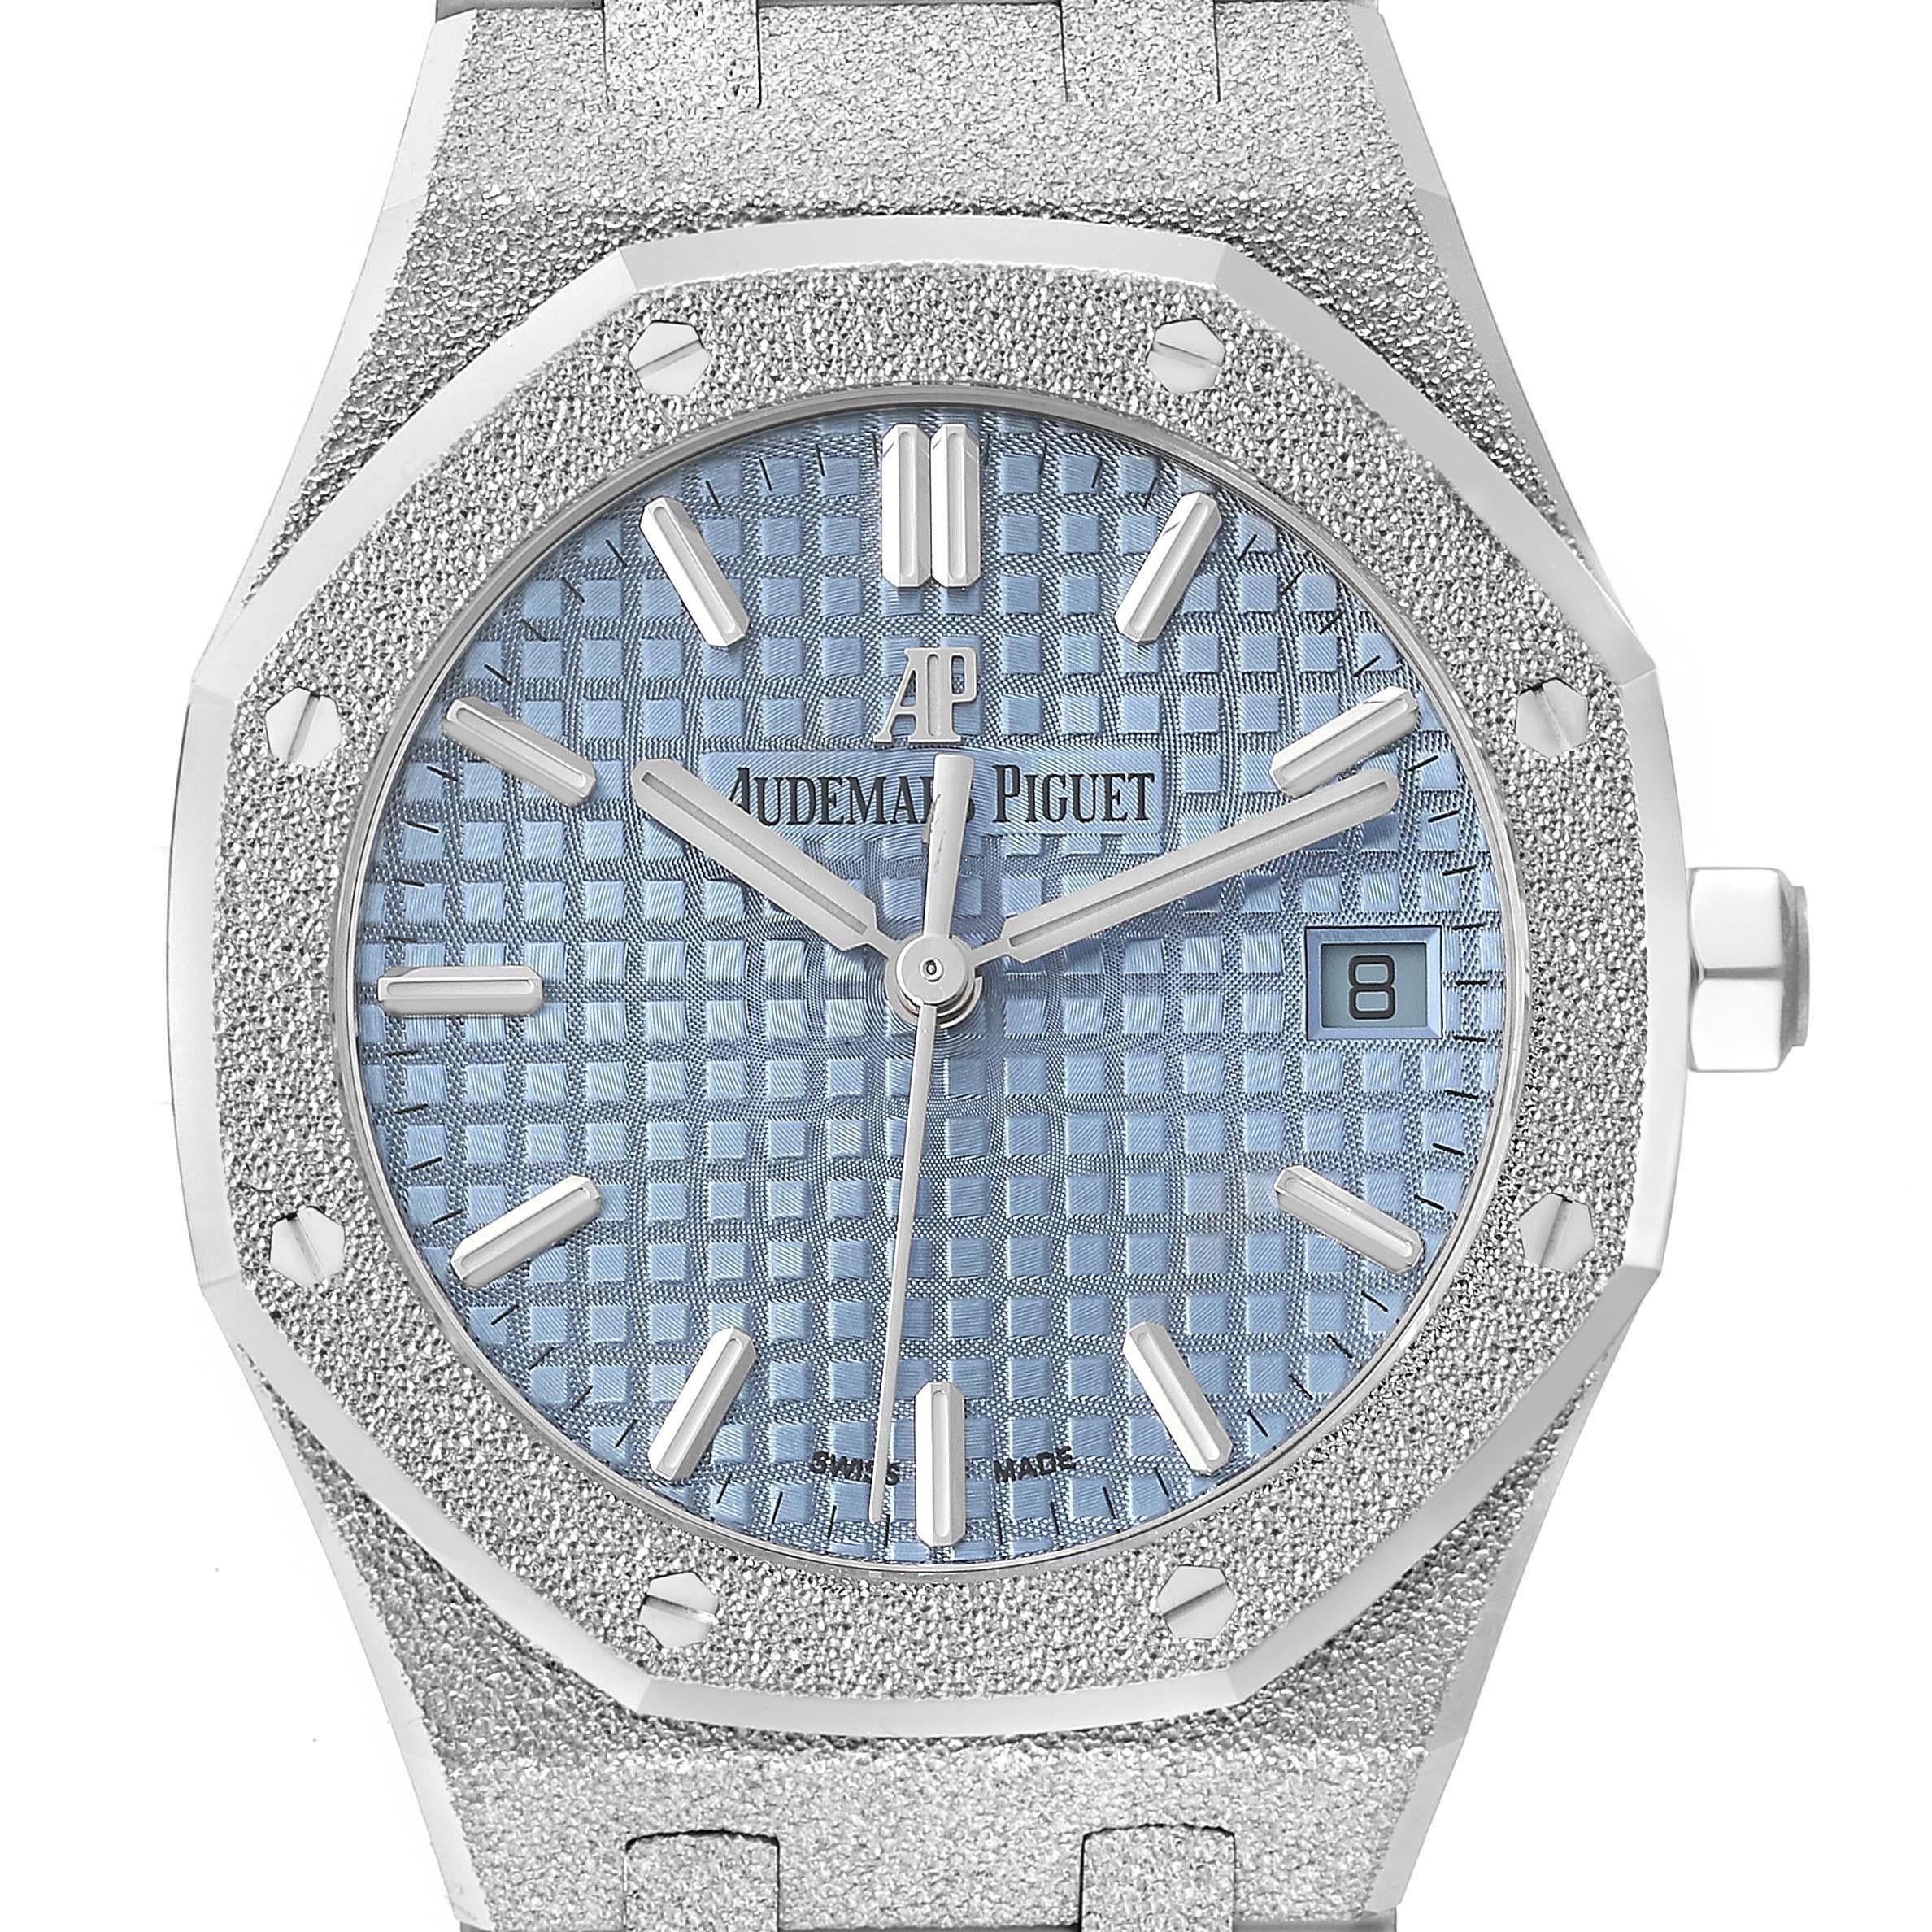 Audemars Piguet Royal Oak Frosted White Gold Self winding Mens Watch 77353BC Unworn. Automatic self-winding movement. Hammered 18K white gold case 34.0mm in diameter. Exhibition sapphire case back. 18K hammered white gold bezel punctuated with 8